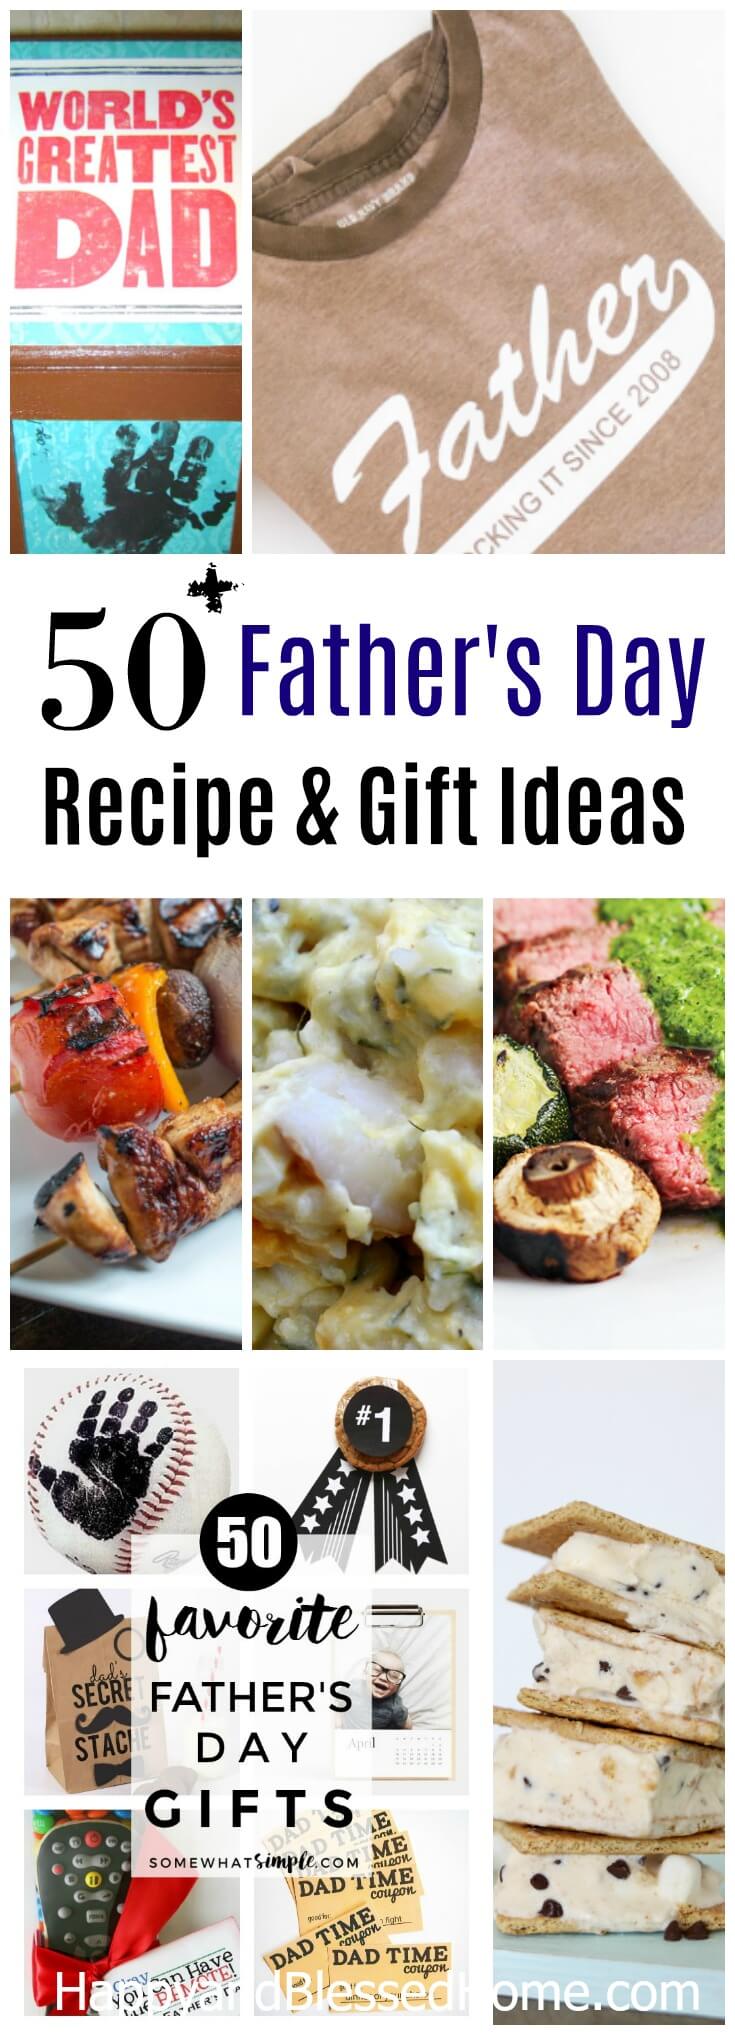 Over 50 Fathers Day Recipe and Gift Ideas from HappyandBlessedHome.com